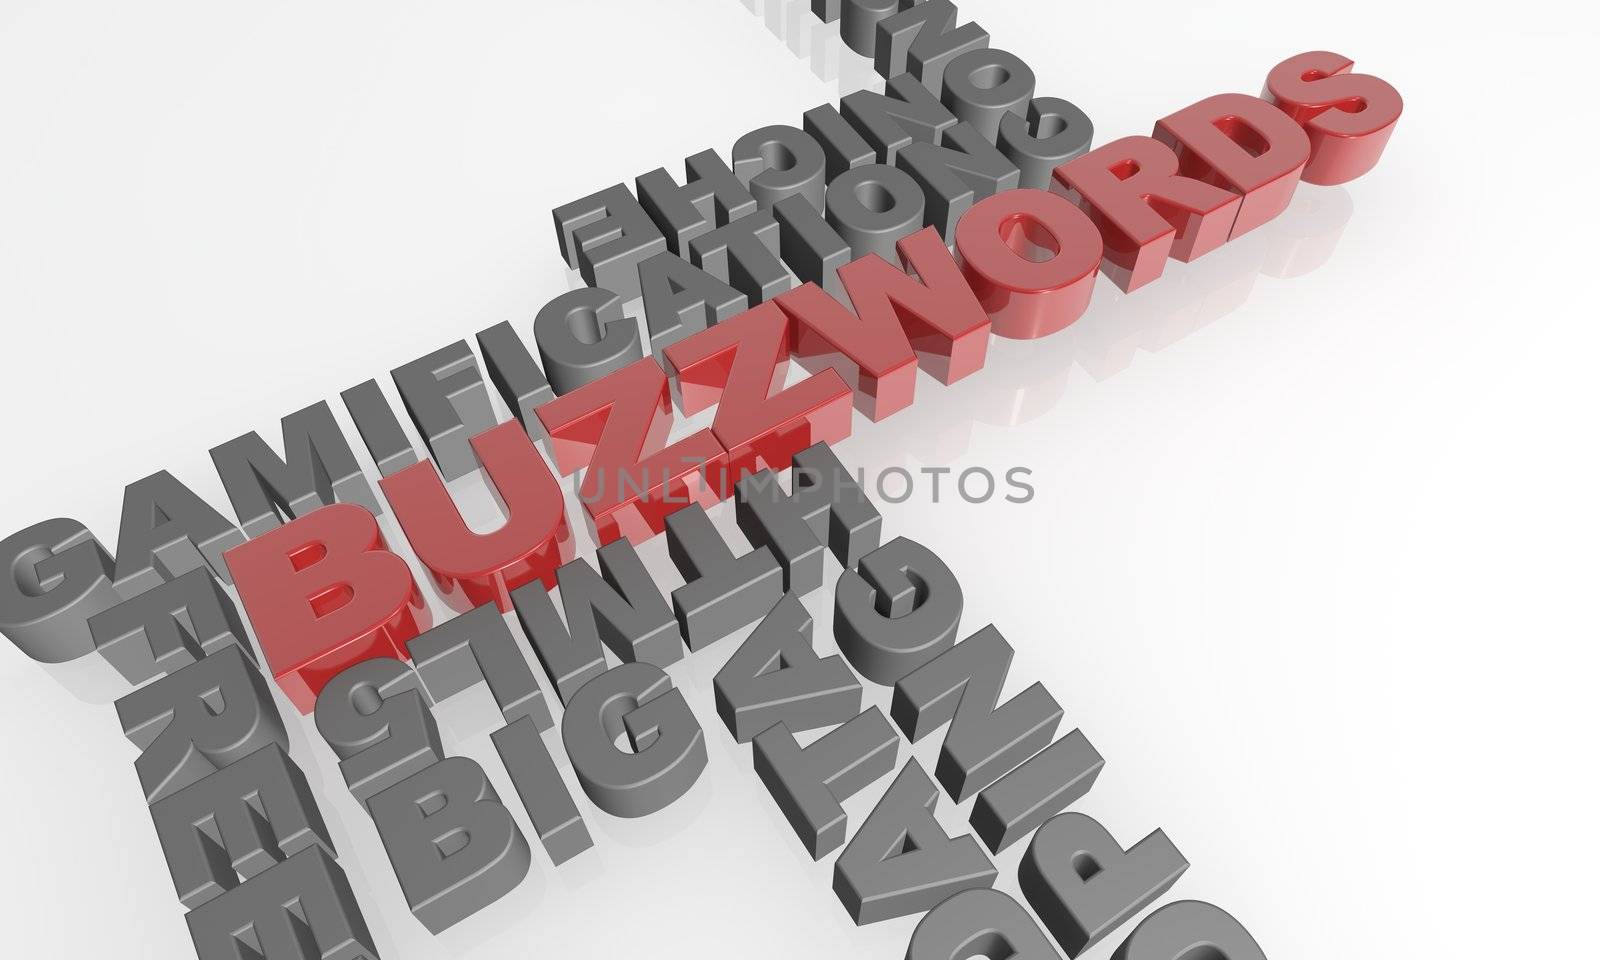 high quality three dimensional text. Great for business presentations and print materials.